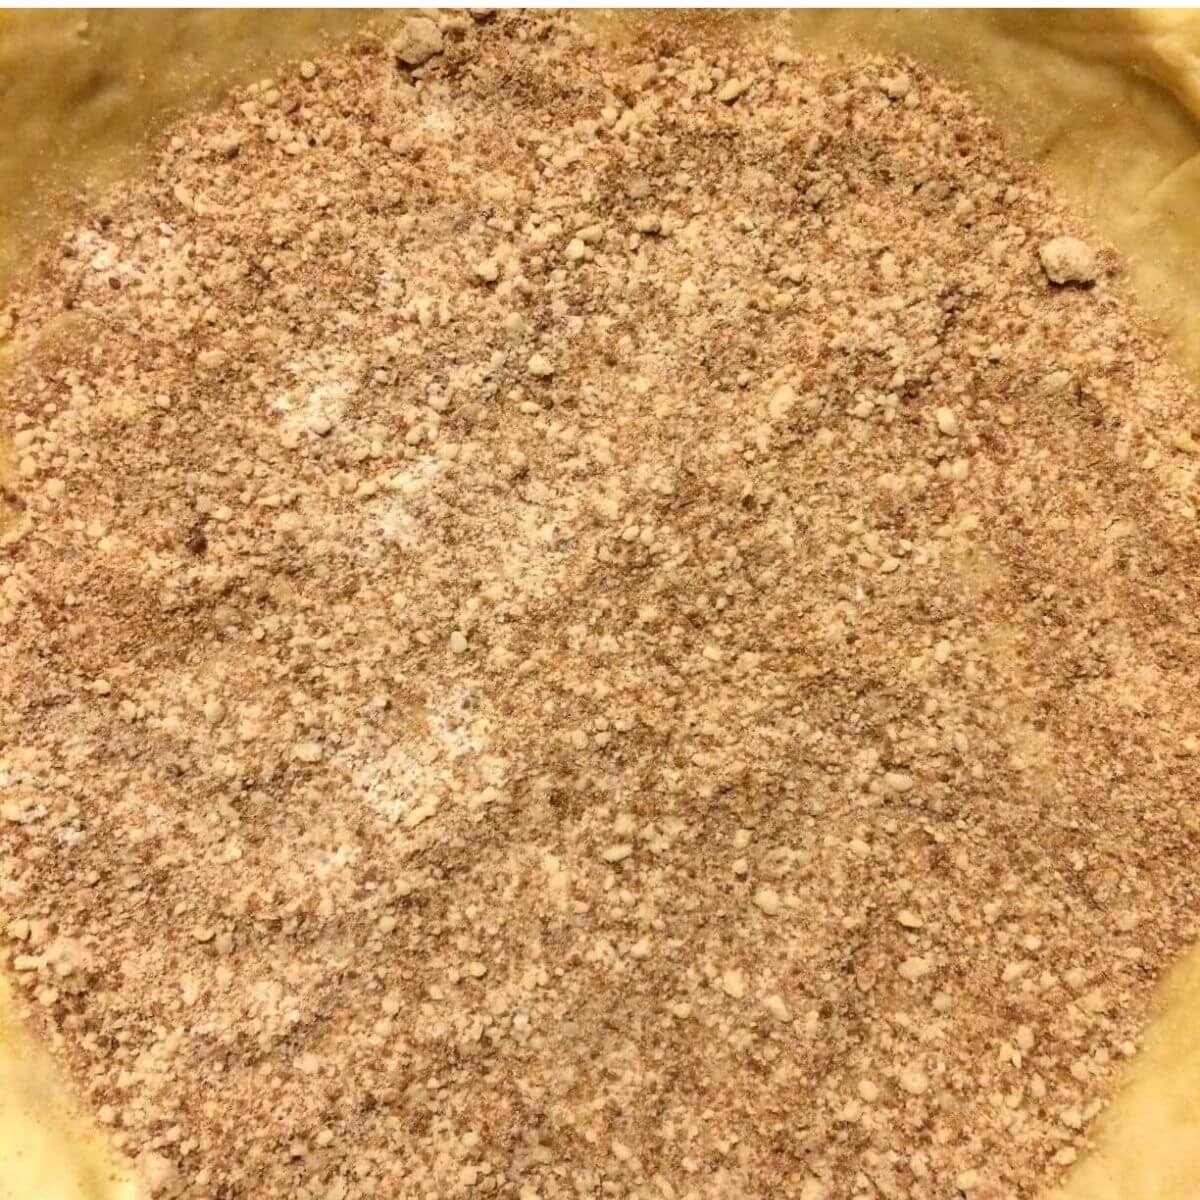 blended almond base for creamy apple pie close up view